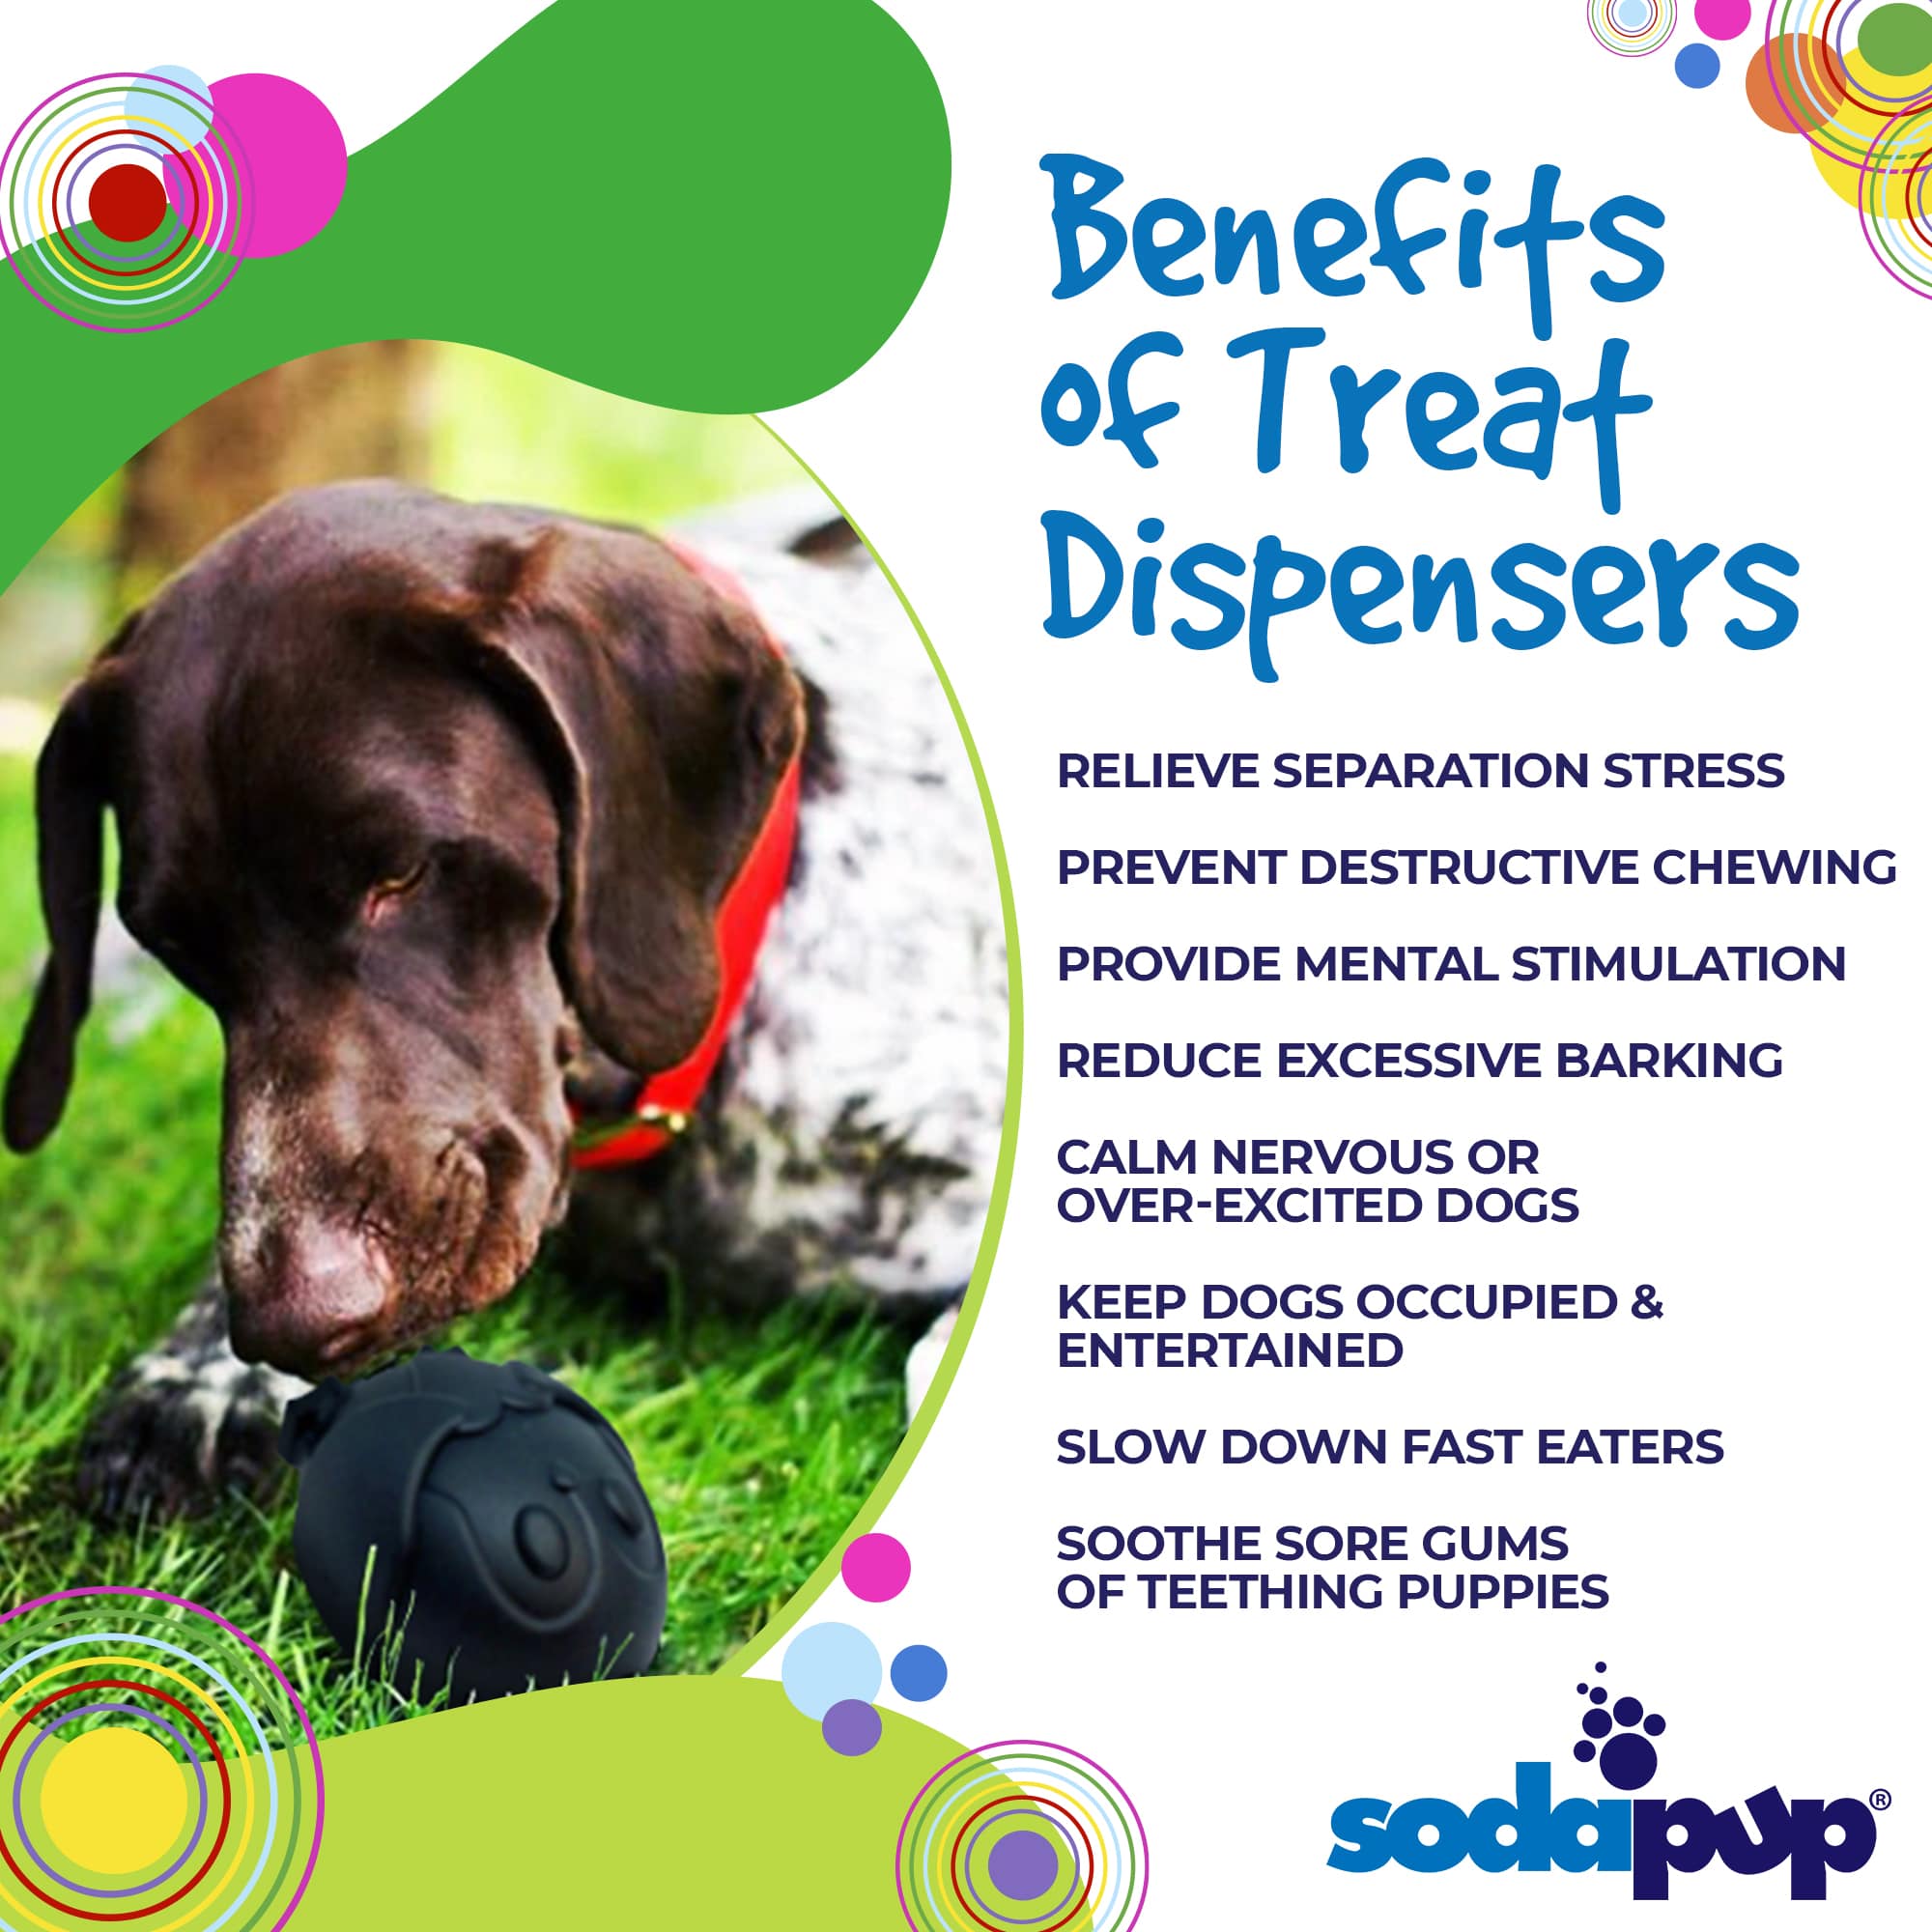 SodaPup - Penguin Durable Rubber Chew Toy and Treat Dispenser